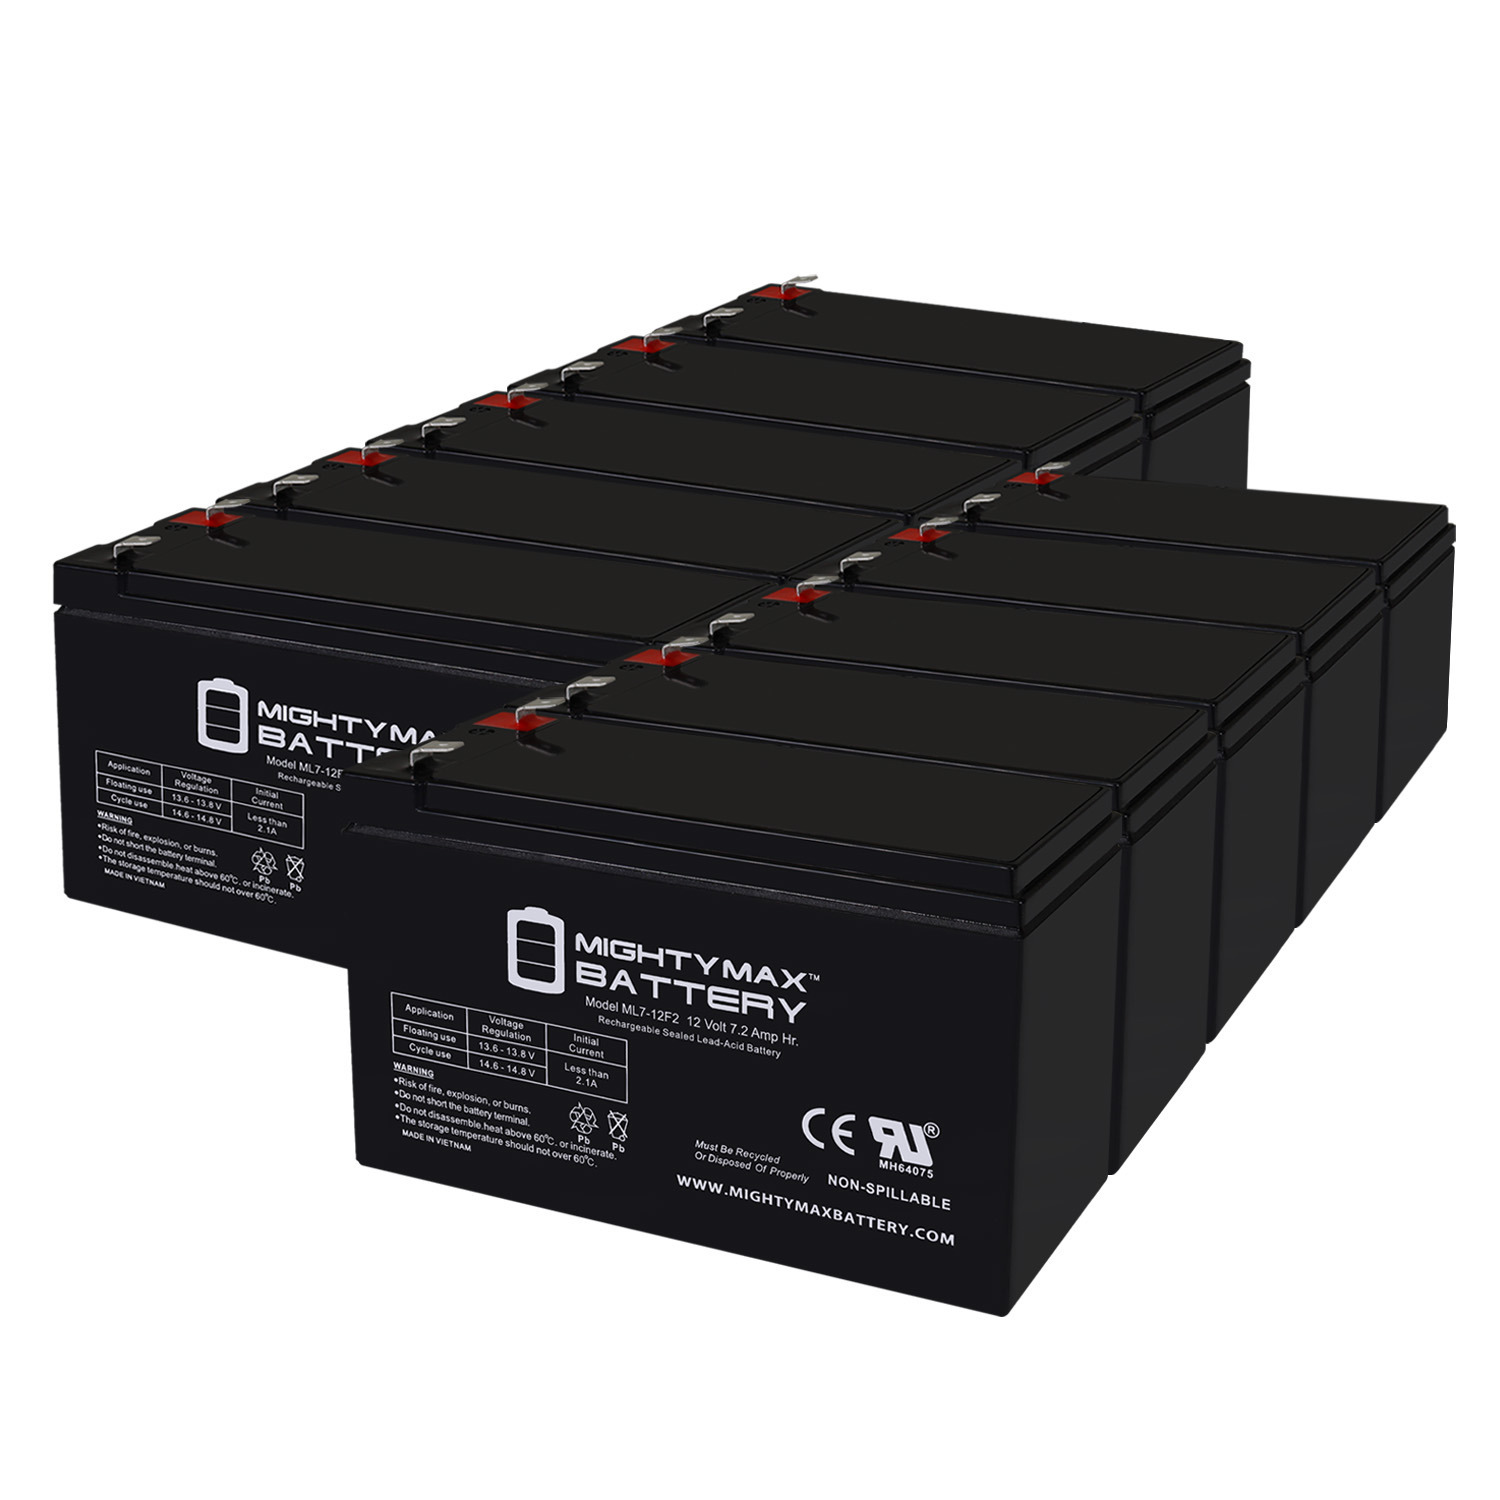 12V 7Ah F2 Replacement Battery for Leoch DJW12-7.0 - 10 Pack